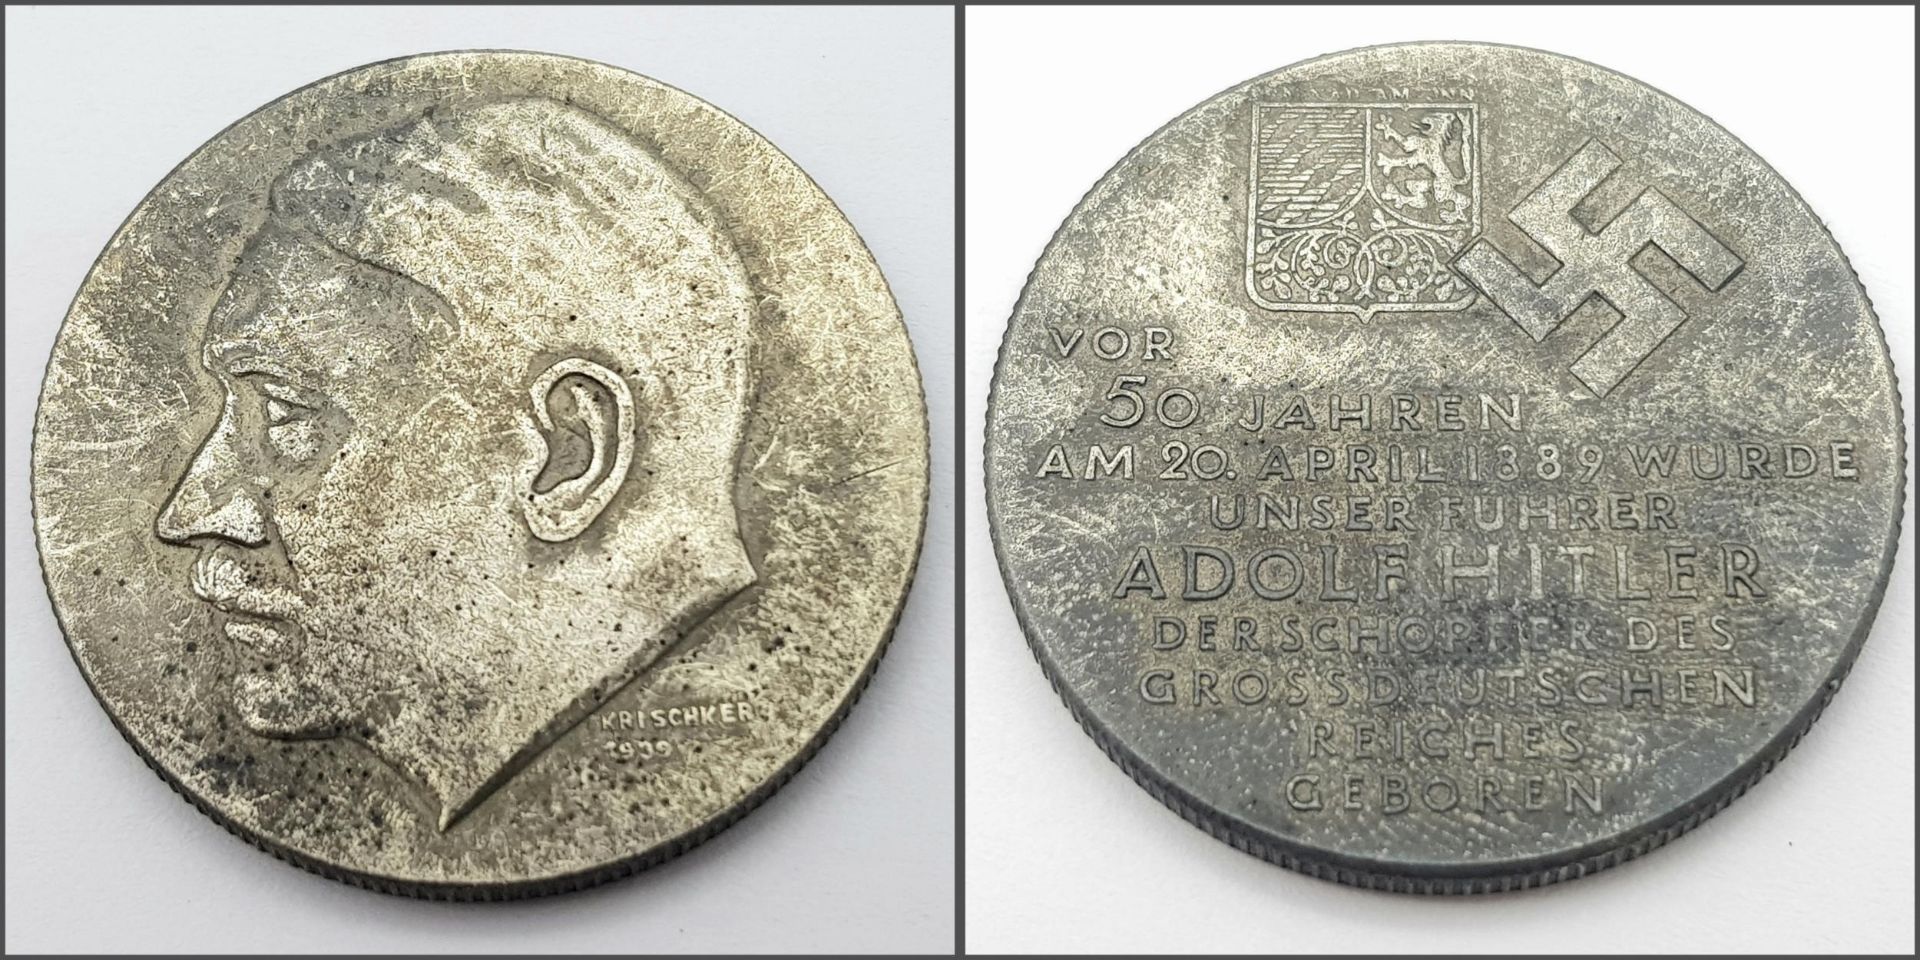 3rd Reich Memorial Token for Hitlers 50th Birthday. - Image 4 of 5